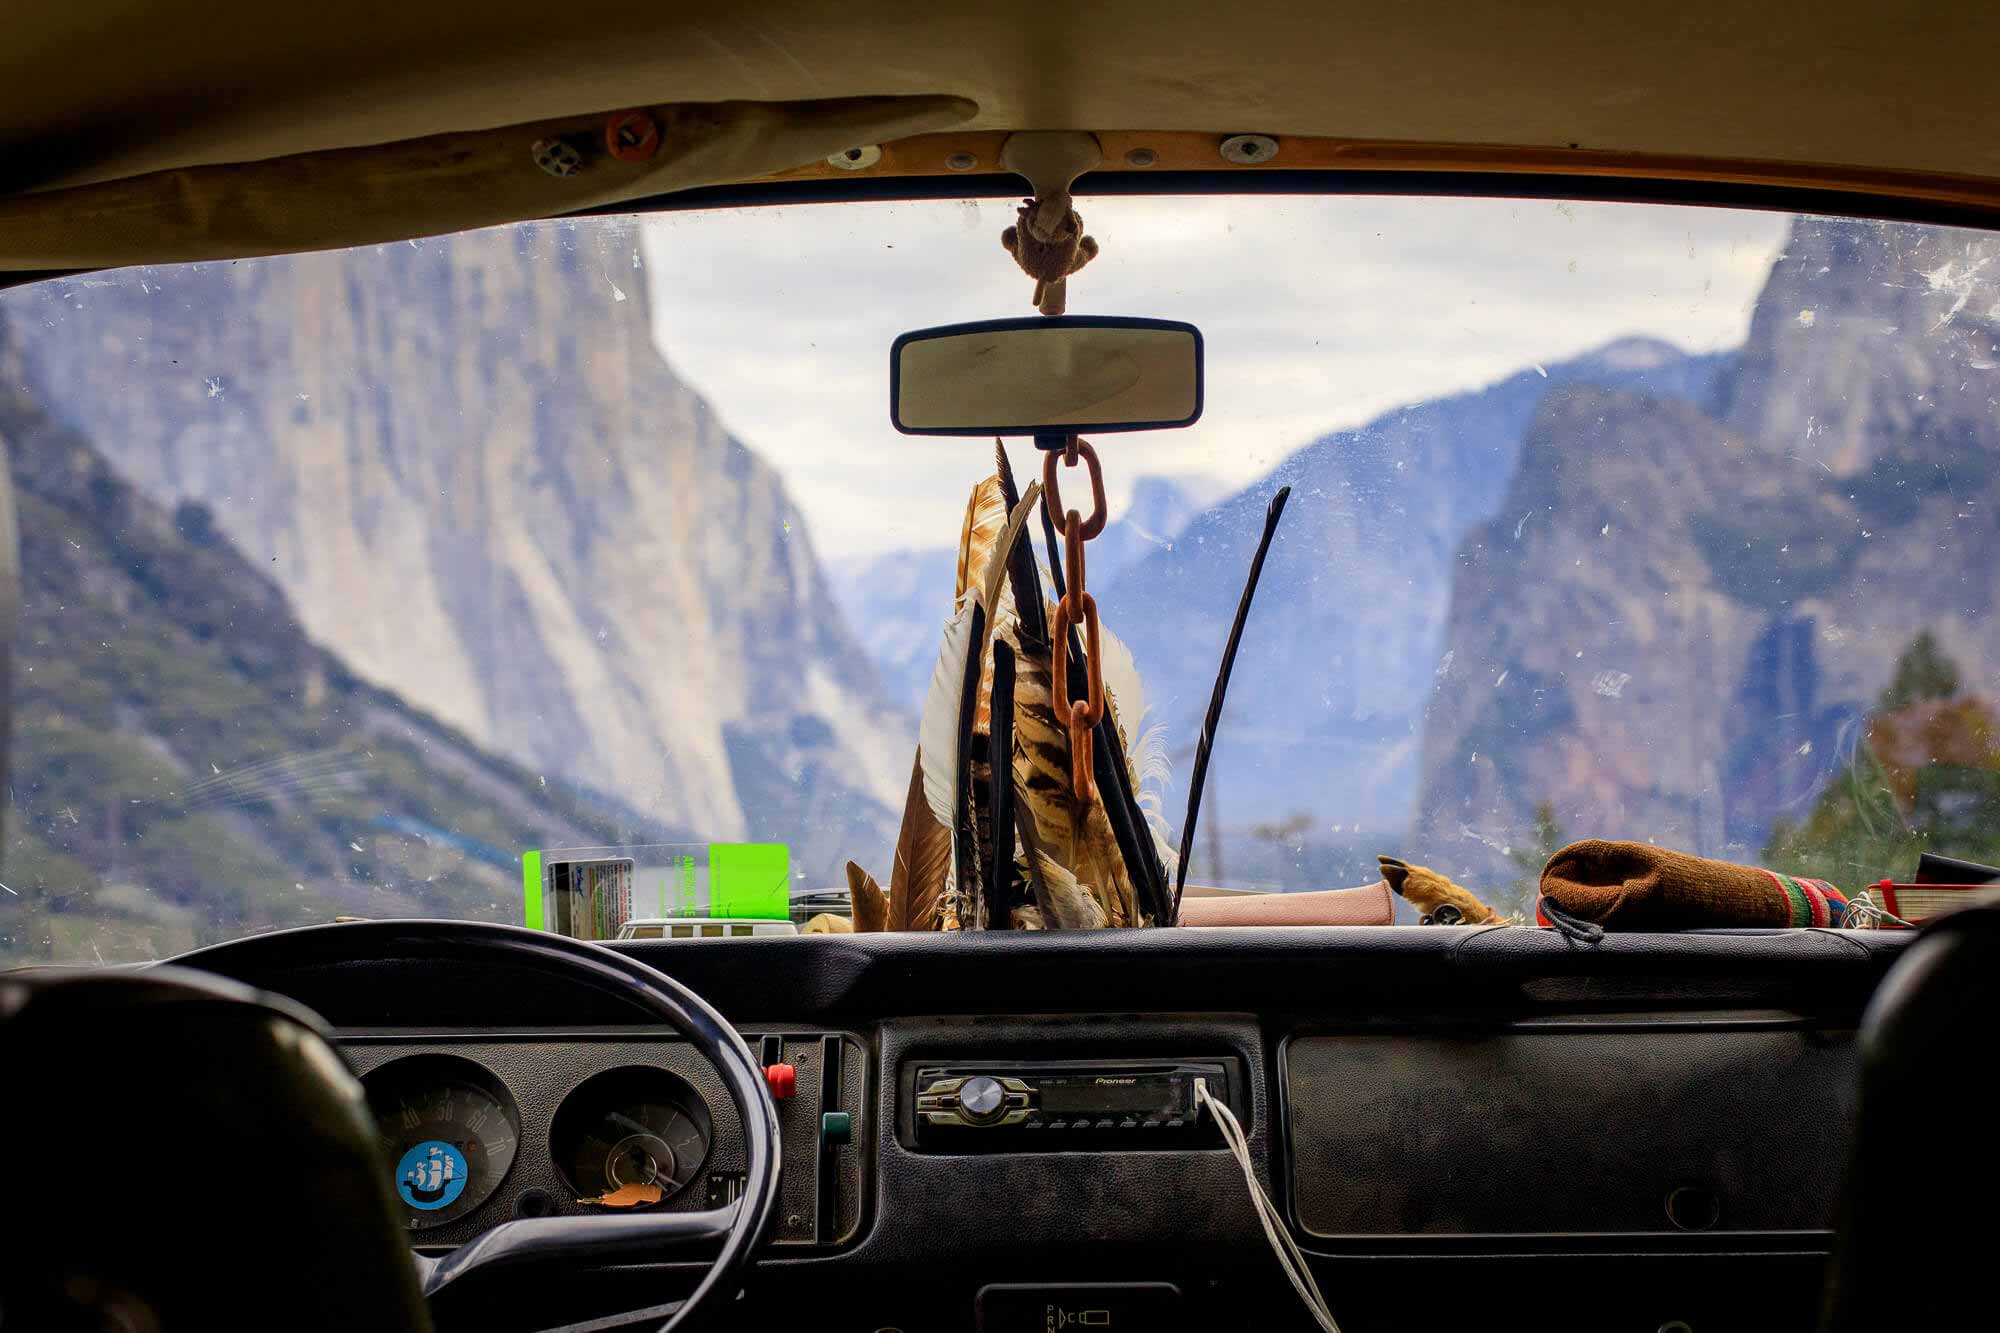 View of Yosemite National Park through the windshield of a Volkswagen Bus